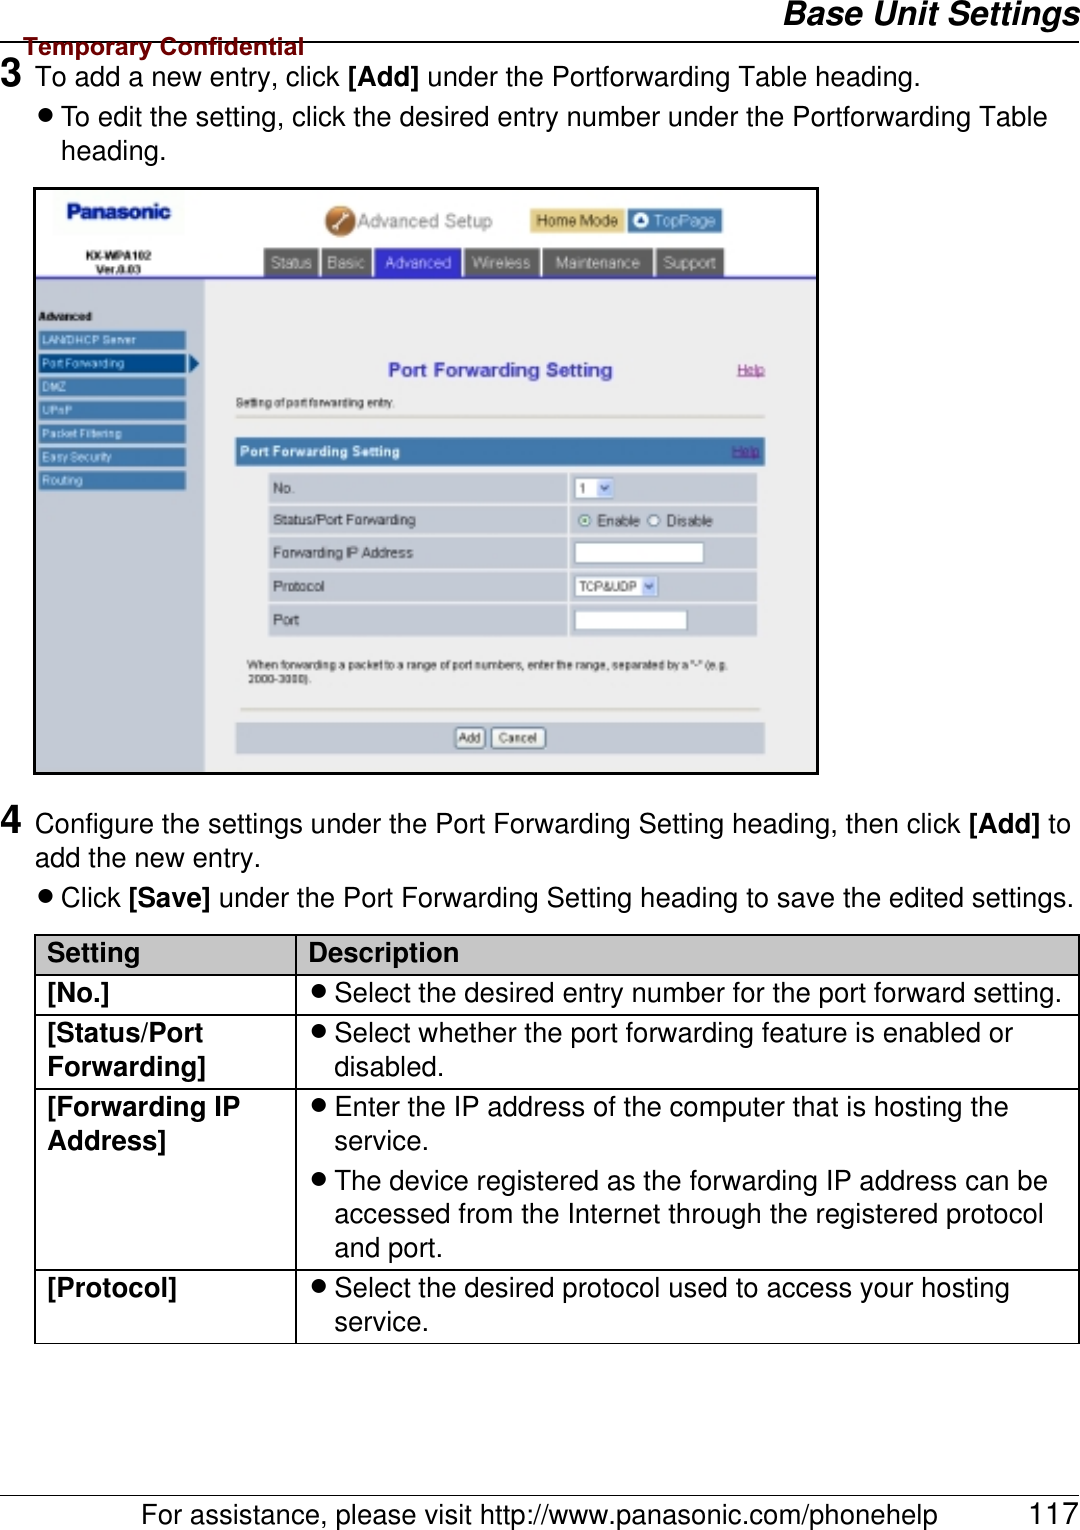 Base Unit SettingsFor assistance, please visit http://www.panasonic.com/phonehelp 1173To add a new entry, click [Add] under the Portforwarding Table heading.LTo edit the setting, click the desired entry number under the Portforwarding Table heading.4Configure the settings under the Port Forwarding Setting heading, then click [Add] to add the new entry.LClick [Save] under the Port Forwarding Setting heading to save the edited settings.Setting Description[No.] LSelect the desired entry number for the port forward setting.[Status/Port Forwarding]LSelect whether the port forwarding feature is enabled or disabled.[Forwarding IP Address]LEnter the IP address of the computer that is hosting the service.LThe device registered as the forwarding IP address can be accessed from the Internet through the registered protocol and port.[Protocol] LSelect the desired protocol used to access your hosting service.Temporary Confidential